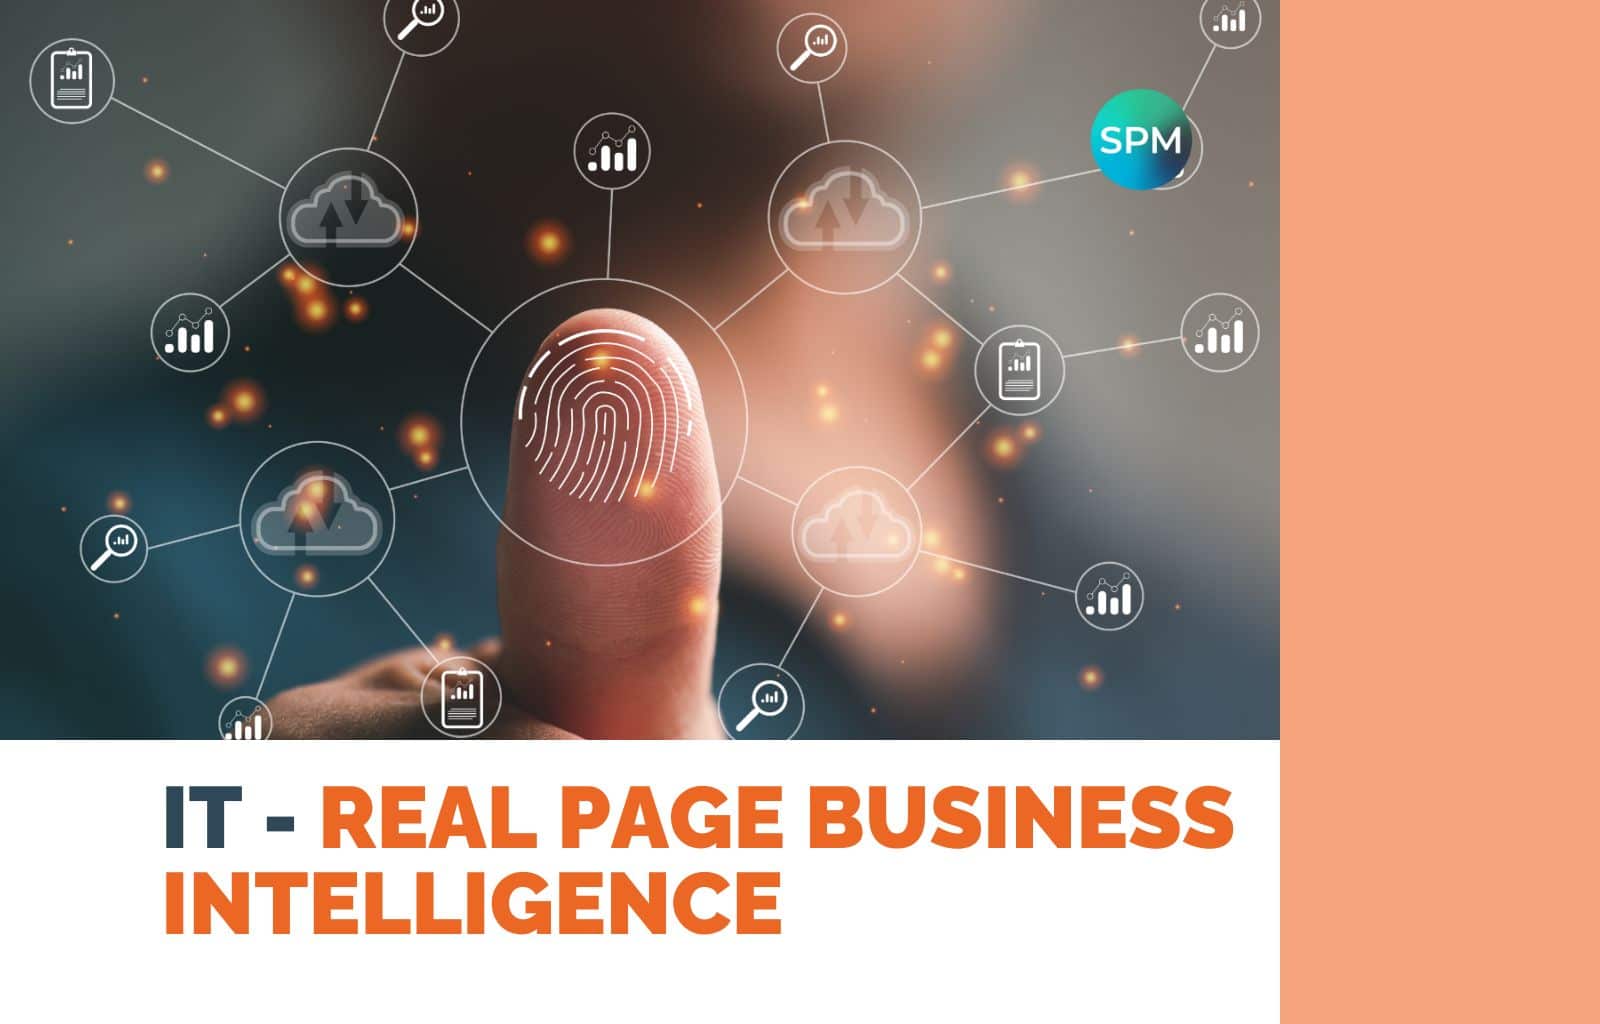 IT - Real Page Business Intelligence